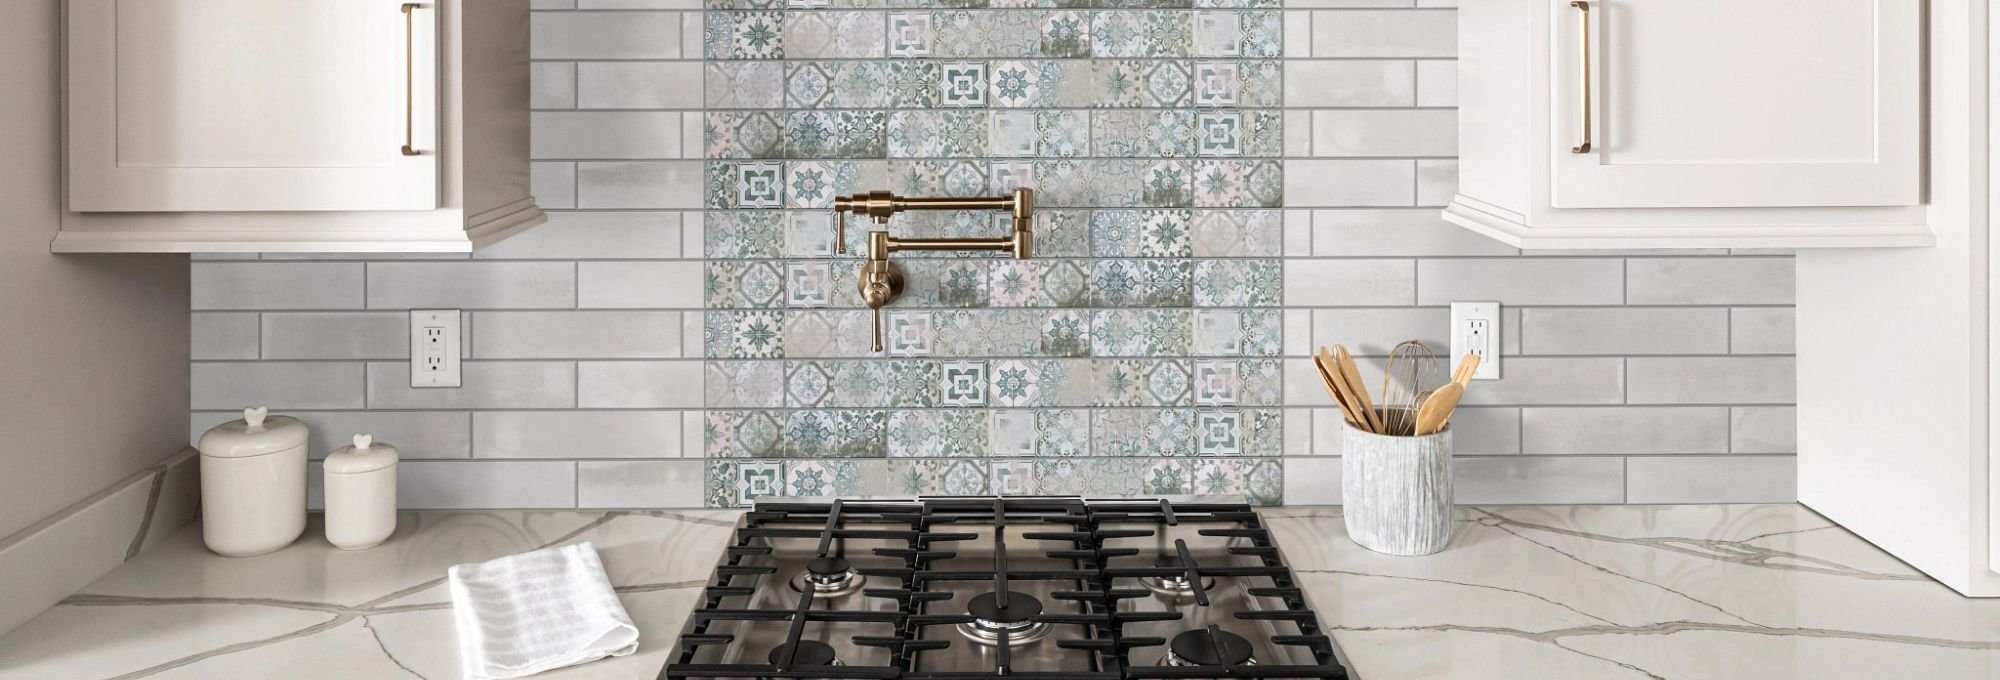 mosaic patterned tiles for kitchen